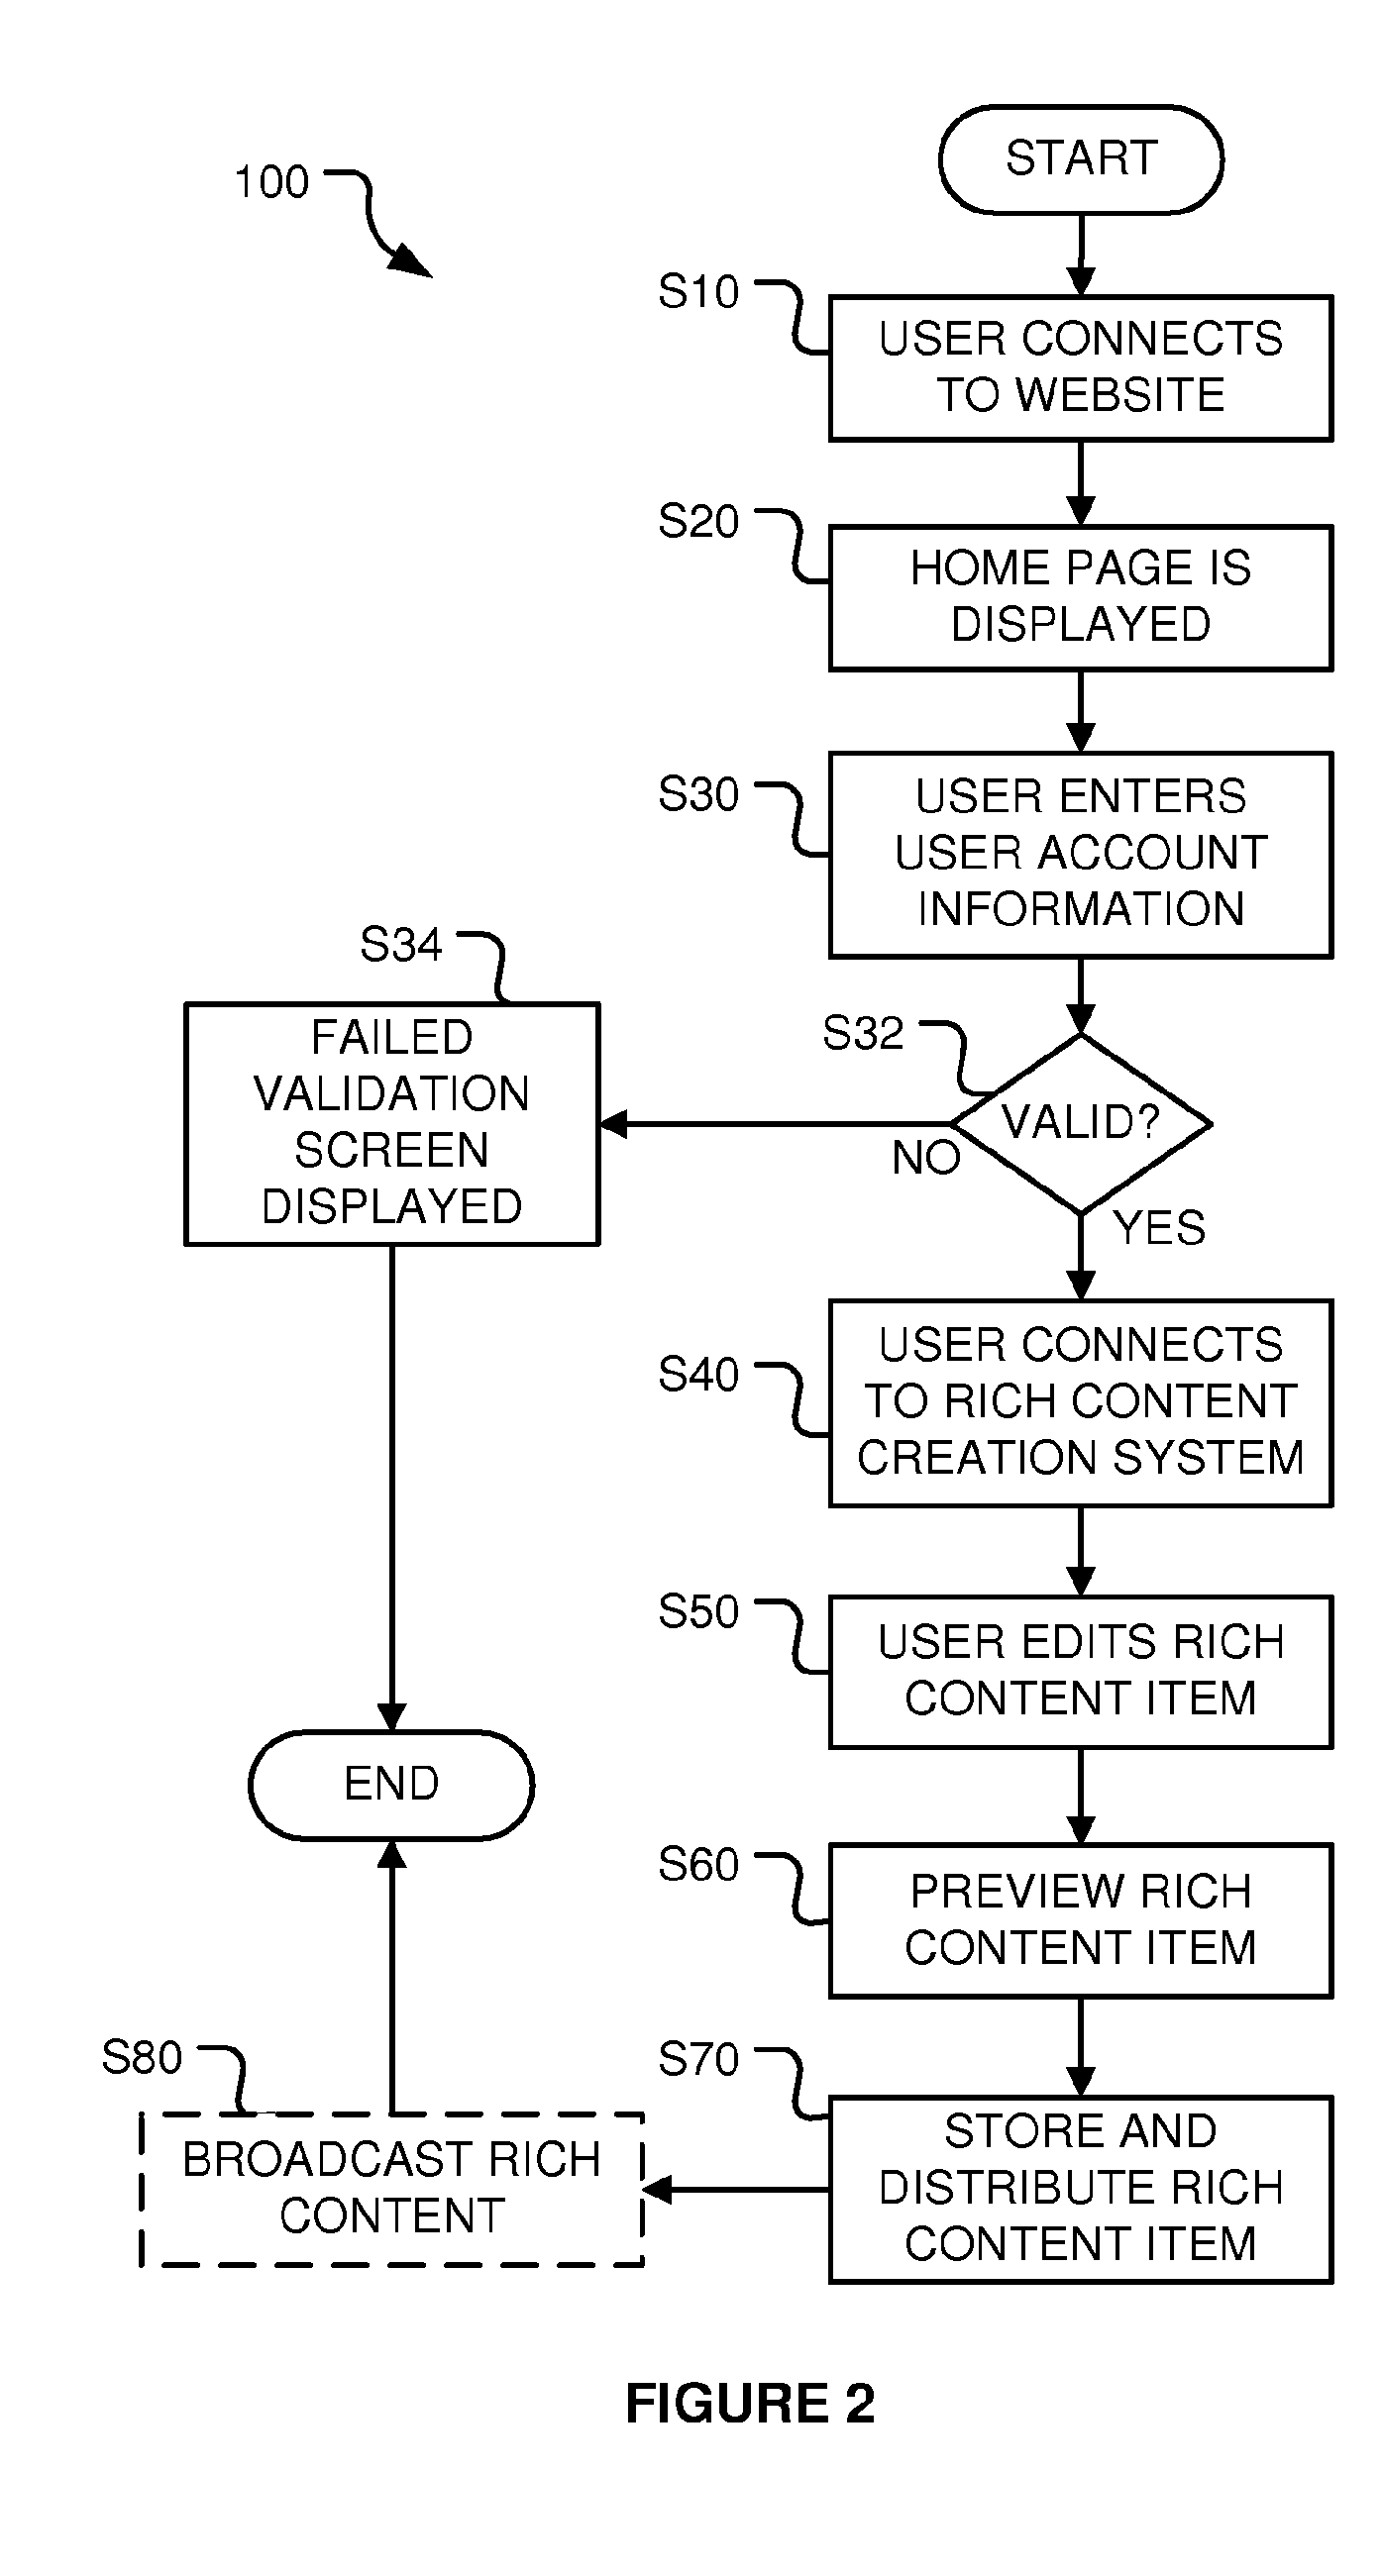 Rich content creation, distribution, and broadcasting system